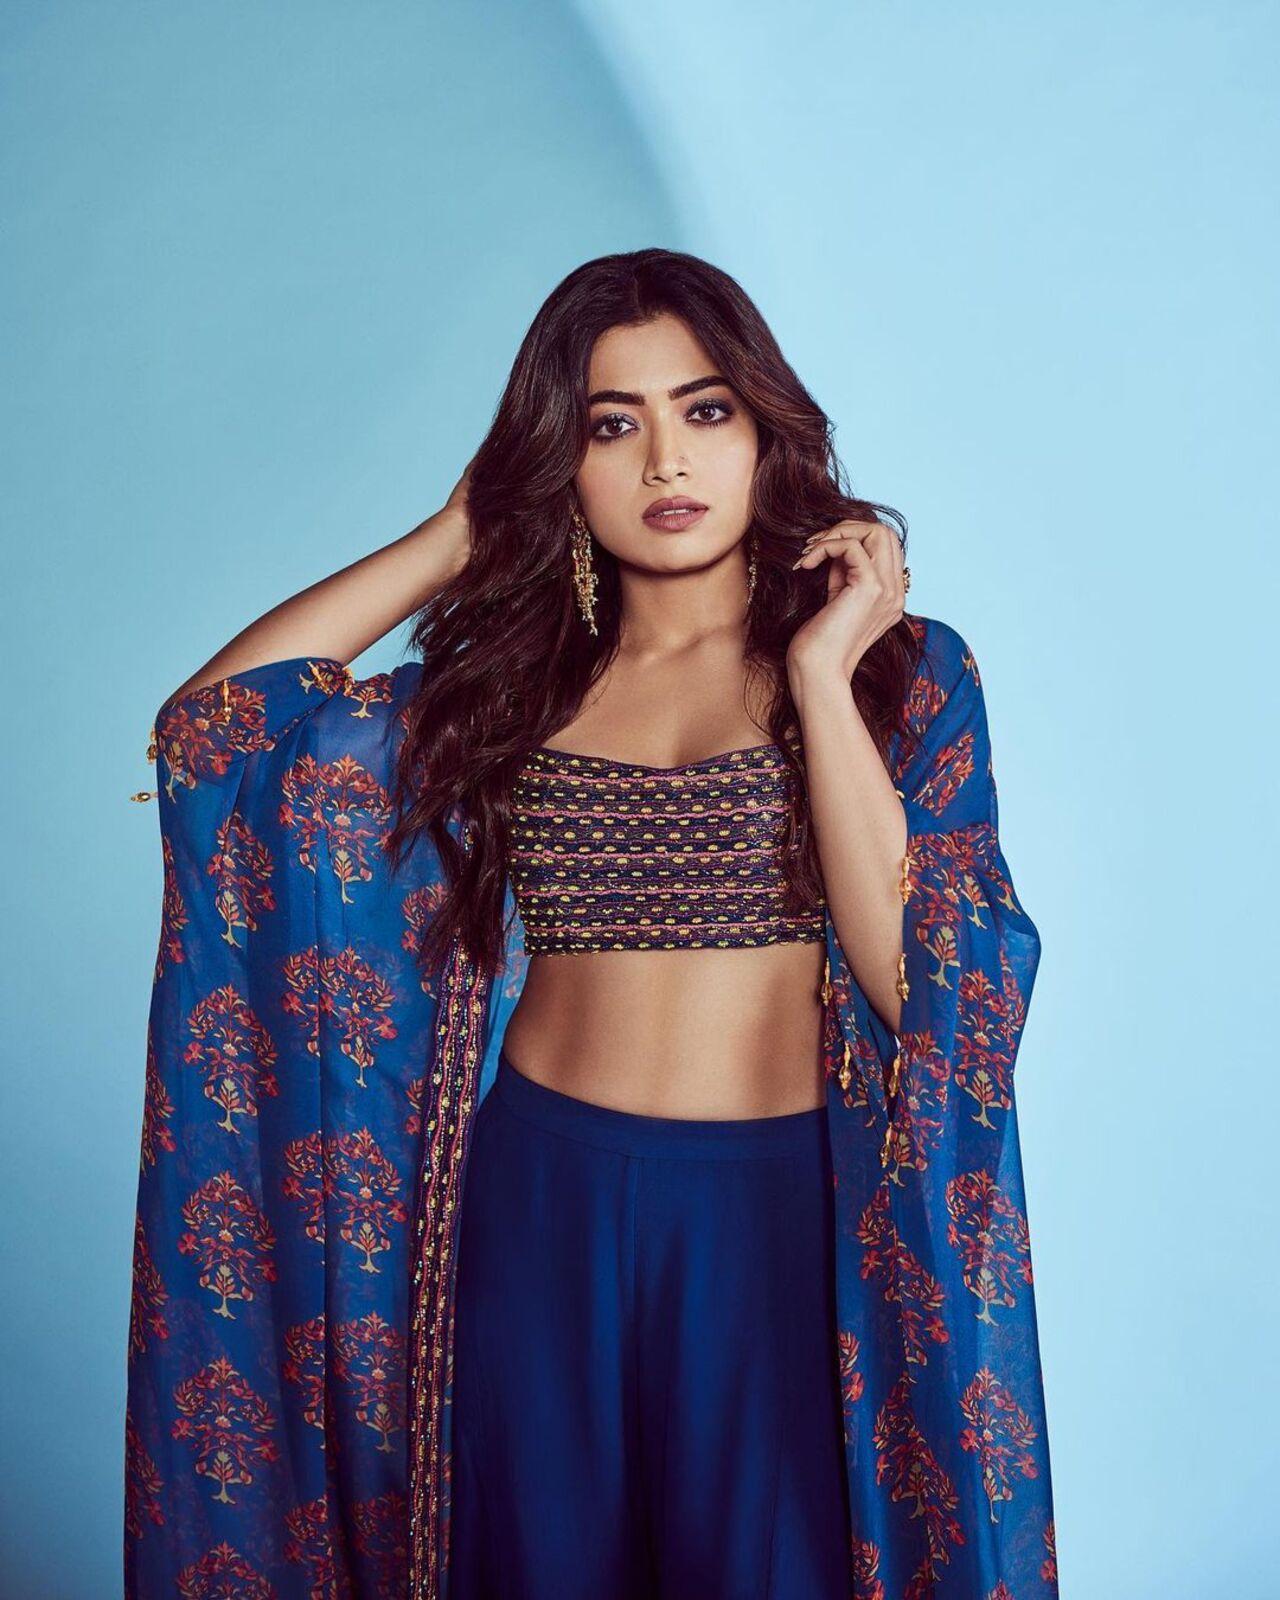 Flaunting her well-toned abs, Rashmika gave major ethnic wear inspiration to her female fans who look up to her for fashion goals 